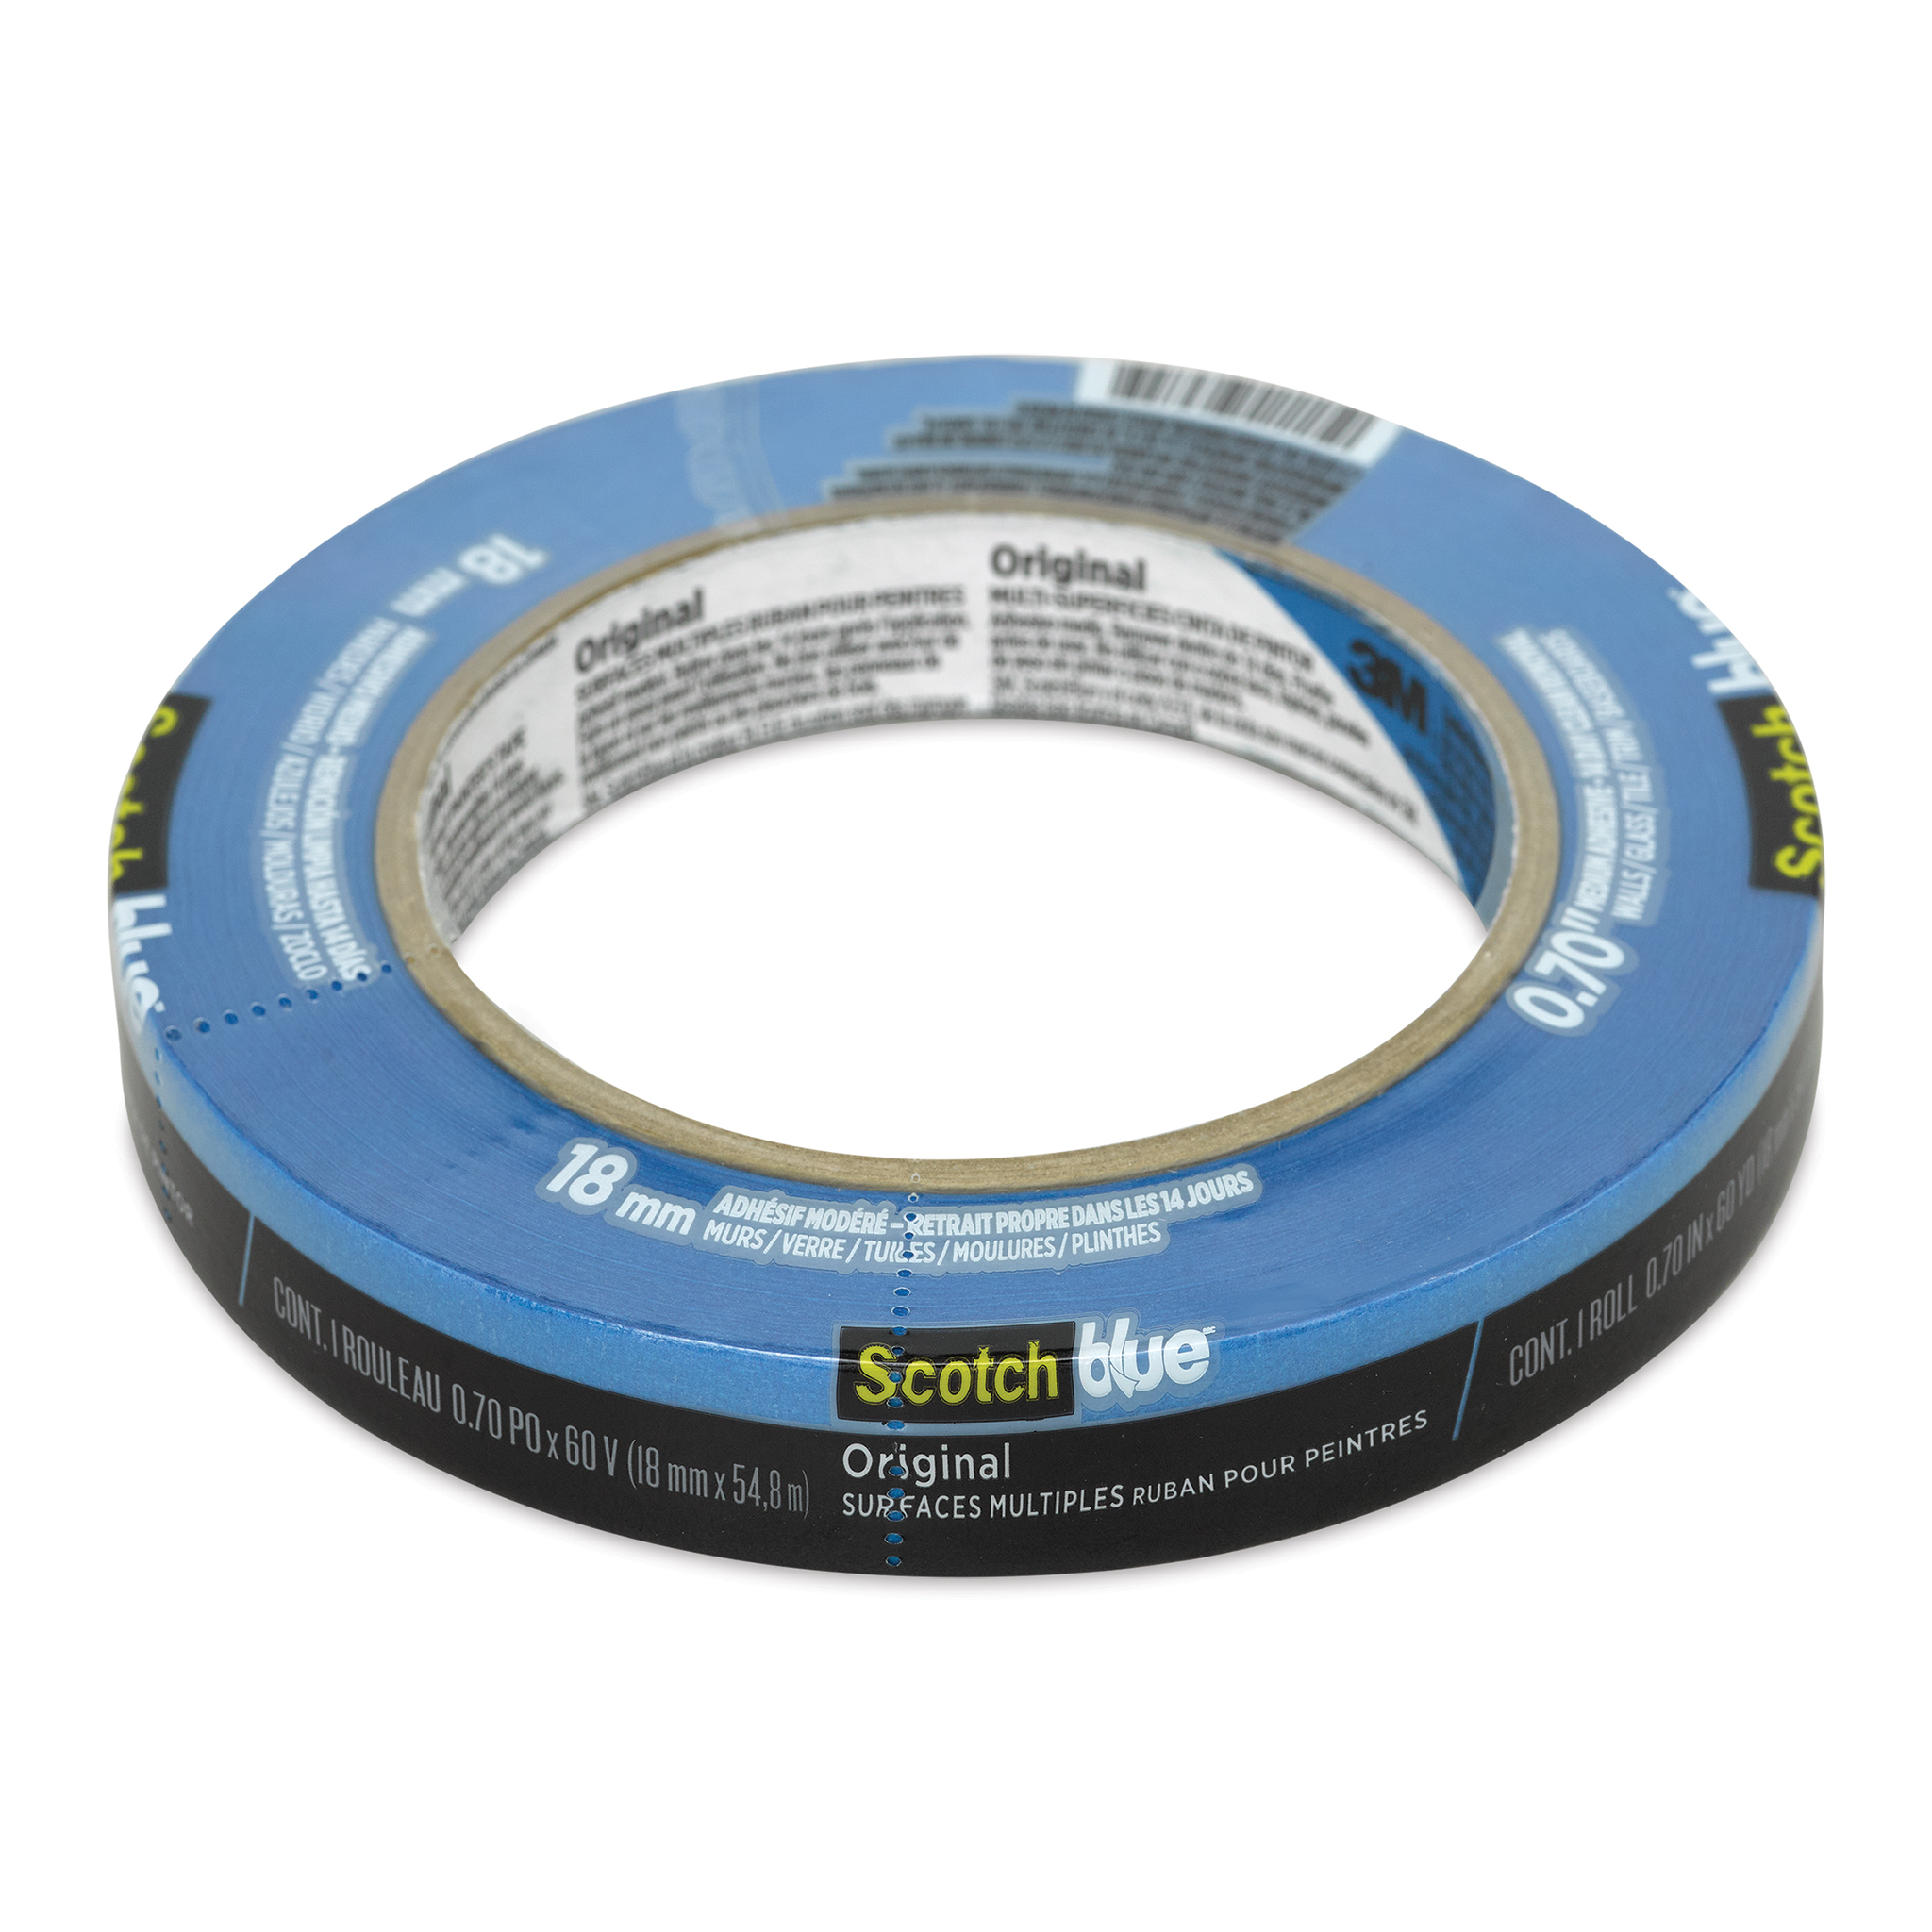 R-Tape 3 Blue Tape - Chemical Resistant Tape